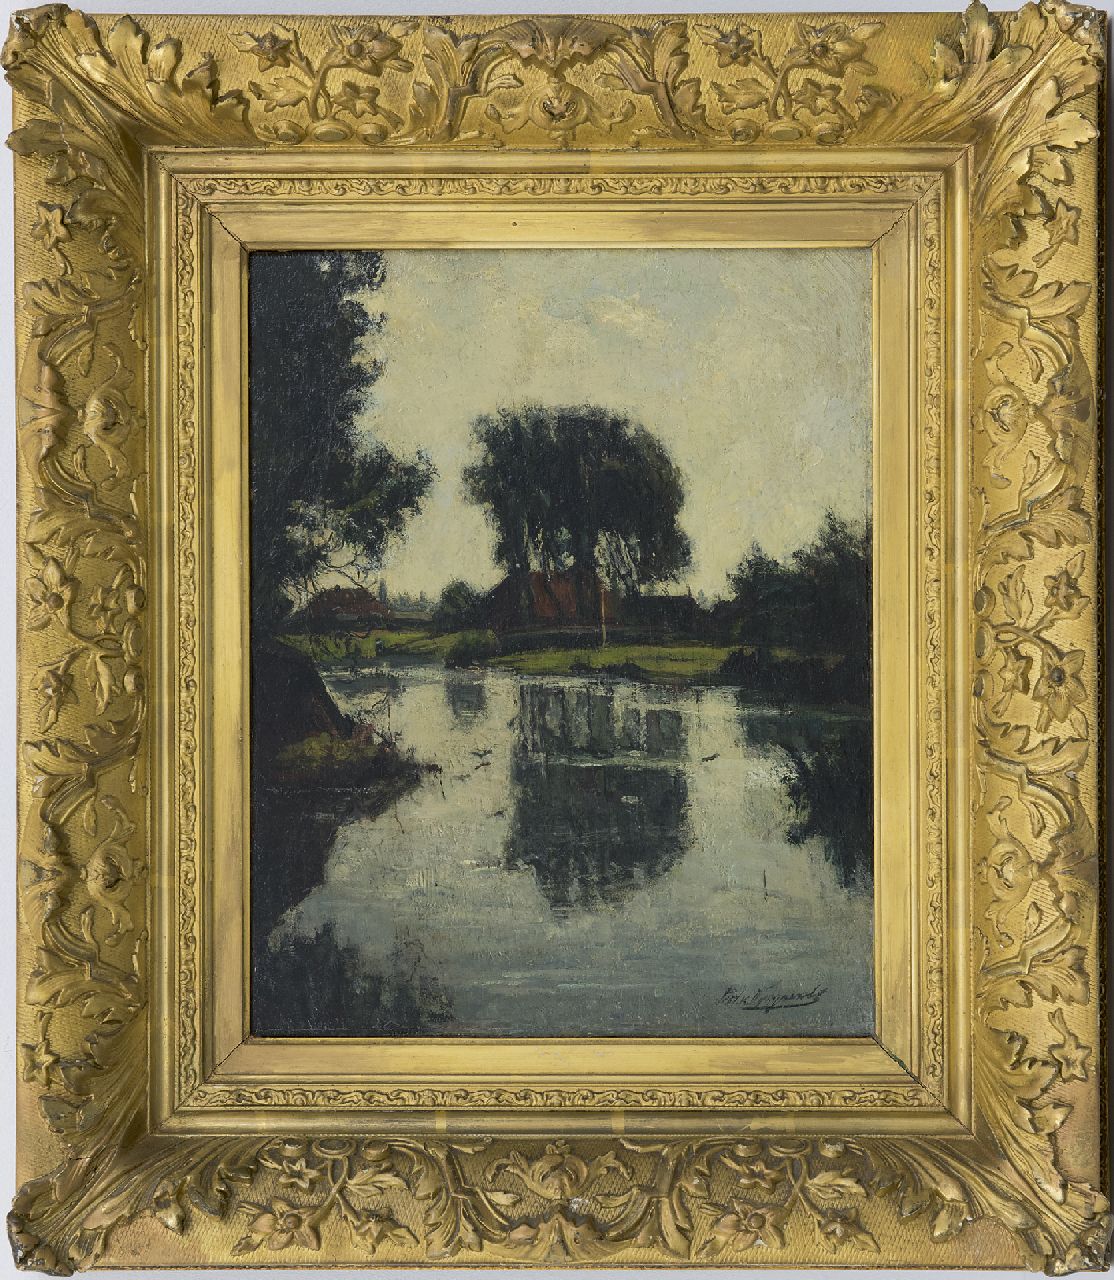 Wijngaerdt P.T. van | Petrus Theodorus 'Piet' van Wijngaerdt | Paintings offered for sale | A farm under trees along the water, oil on canvas 35.0 x 28.0 cm, signed l.r. and painted ca. 1908-1909